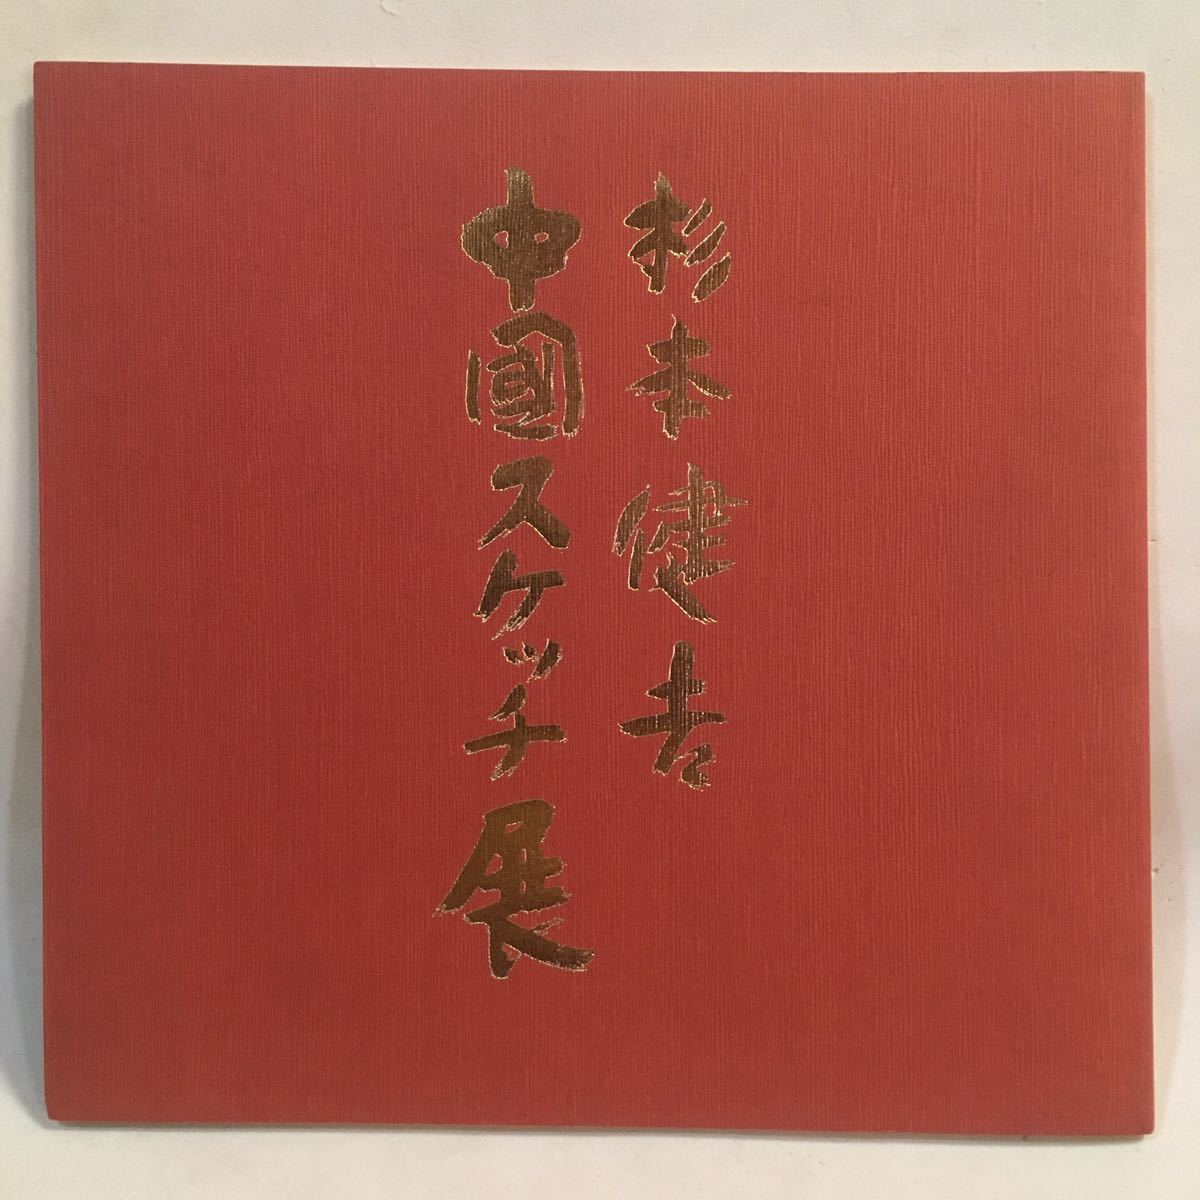 Kenkichi Sugimoto China Sketch Exhibition 25 color drawings Asahi Shimbun Meitetsu Department Store 1982, painting, Art book, Collection of works, Illustrated catalog